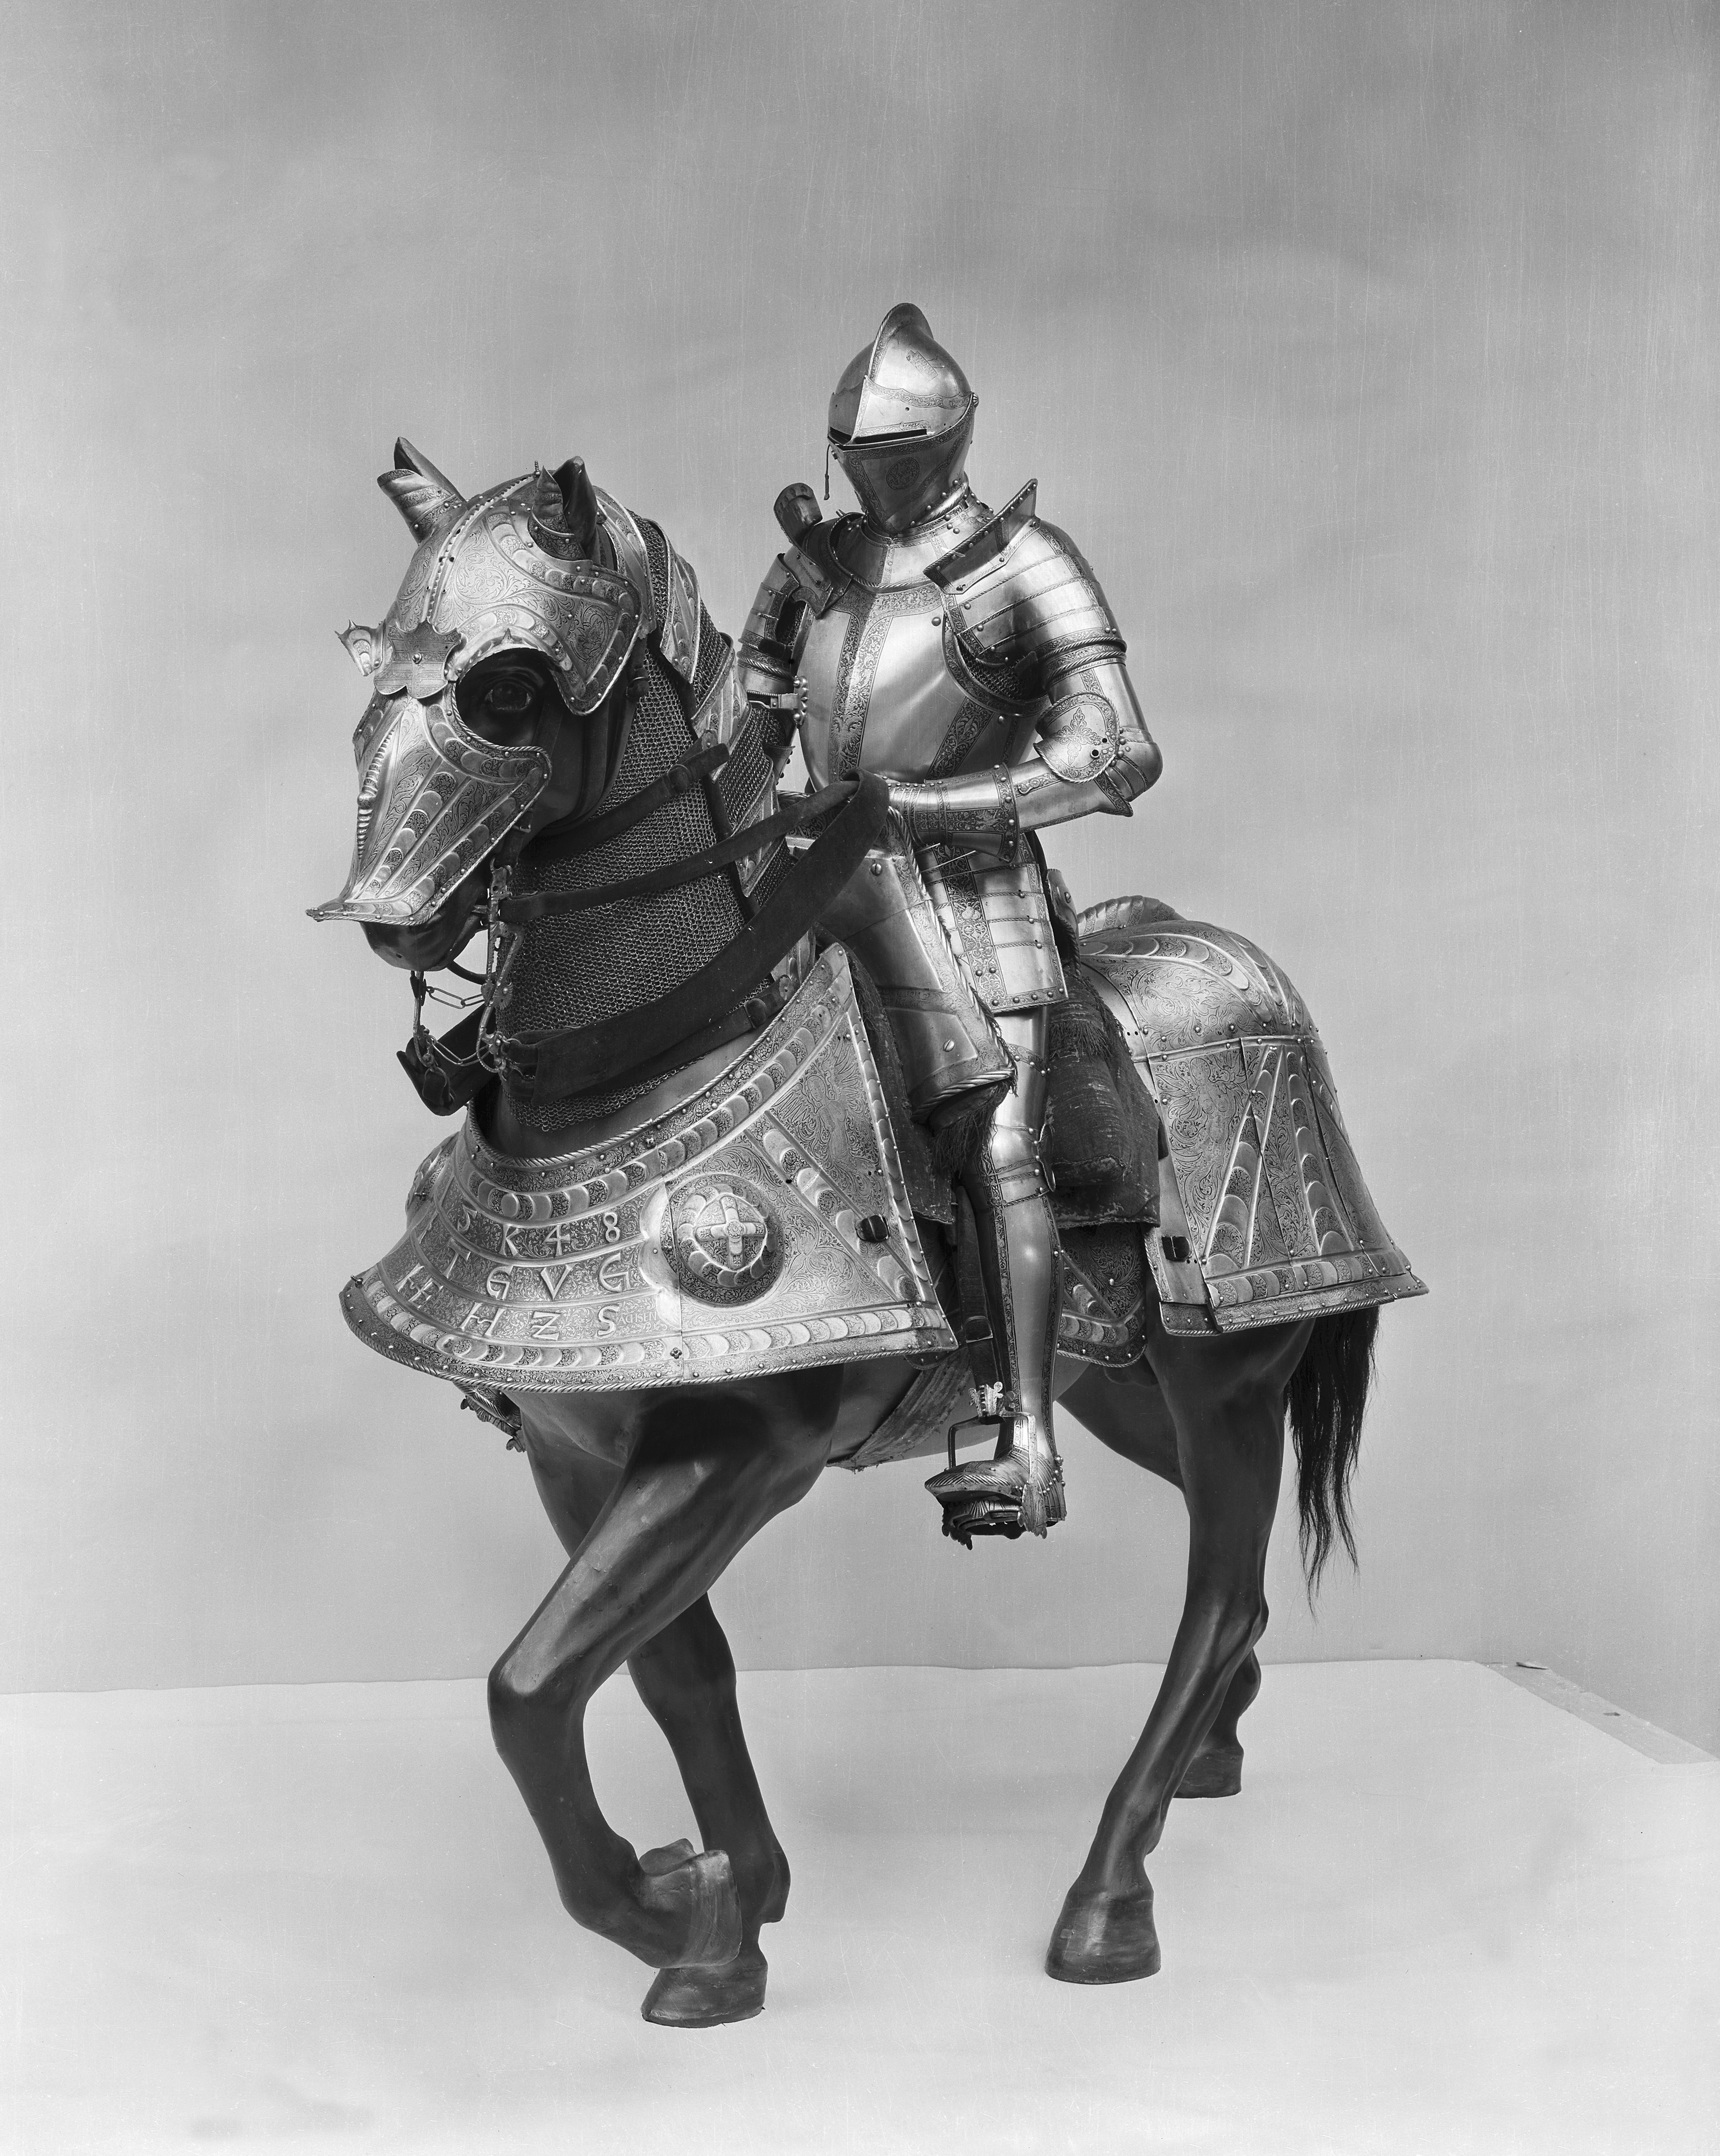 Armor Knight Armet Gauntlets Cuirass Greaves Armored Boots Spear Horse Museum European Men Portrait  3192x4000